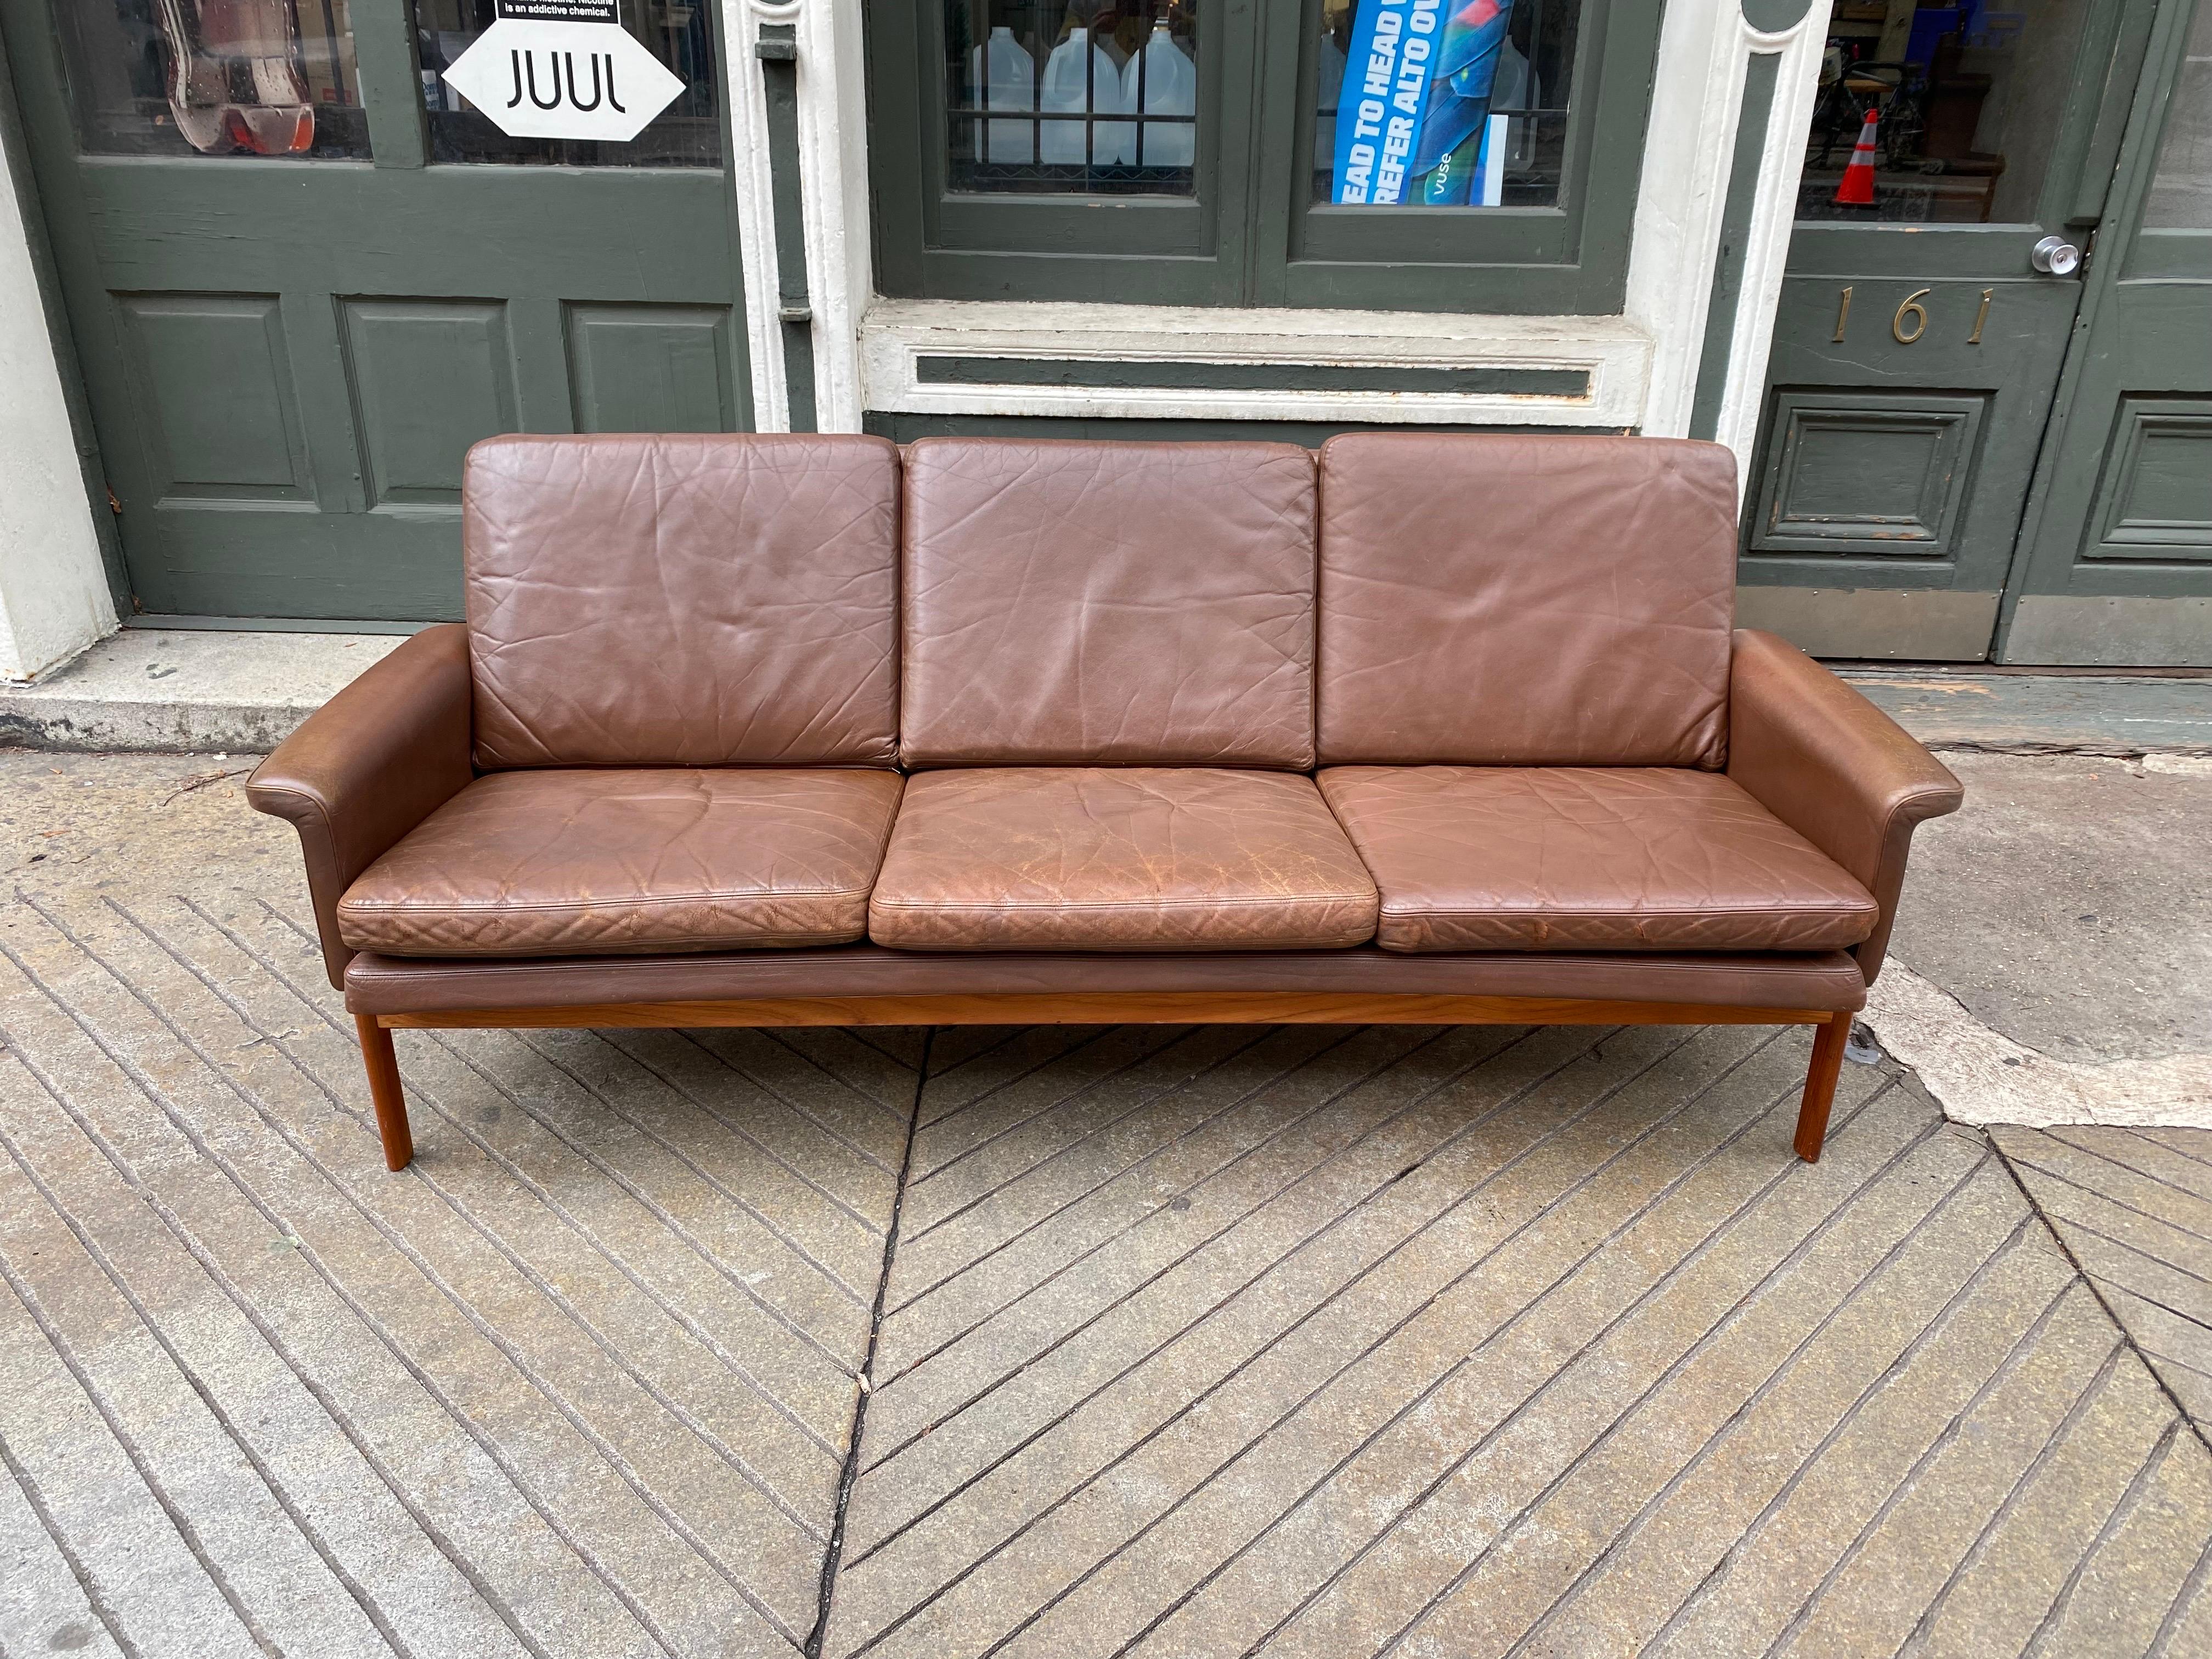 Finn Juhl Jupiter 3 seat brown leather sofa. Shows beautiful Patina and wear! One seat cushion has tear in leather in front as seen in photos, everything else very good. Leather cleaned and waxed! Teak shows nice grain and in nice shape.